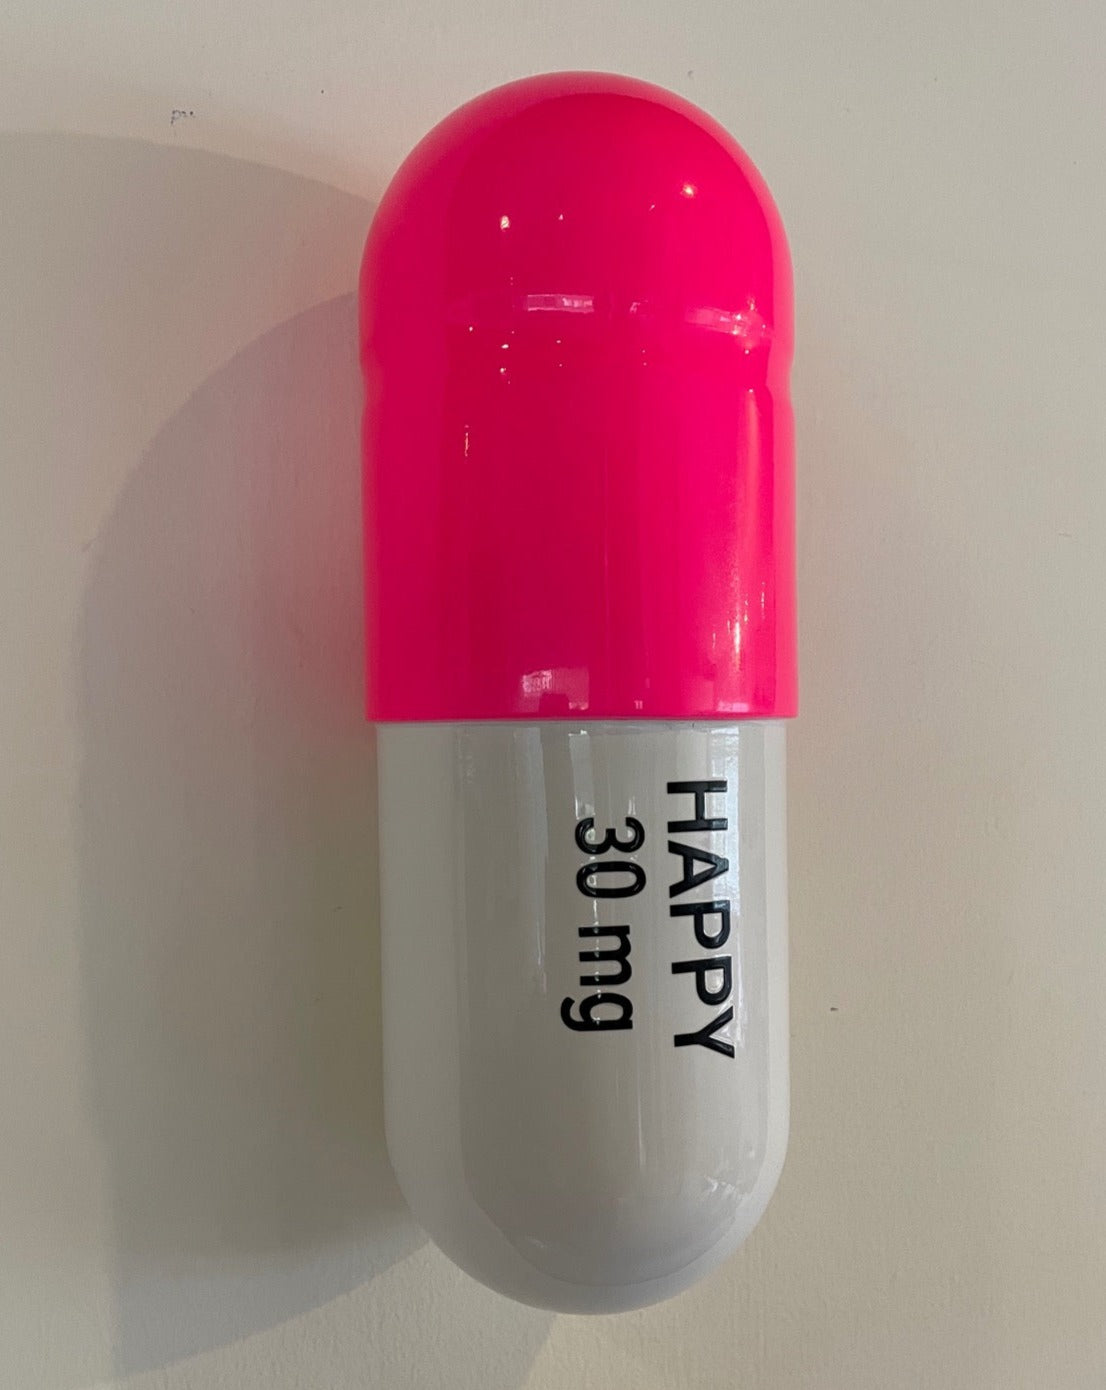 Ceramic Happy Pill 30 mg - Fluorescent pink and White